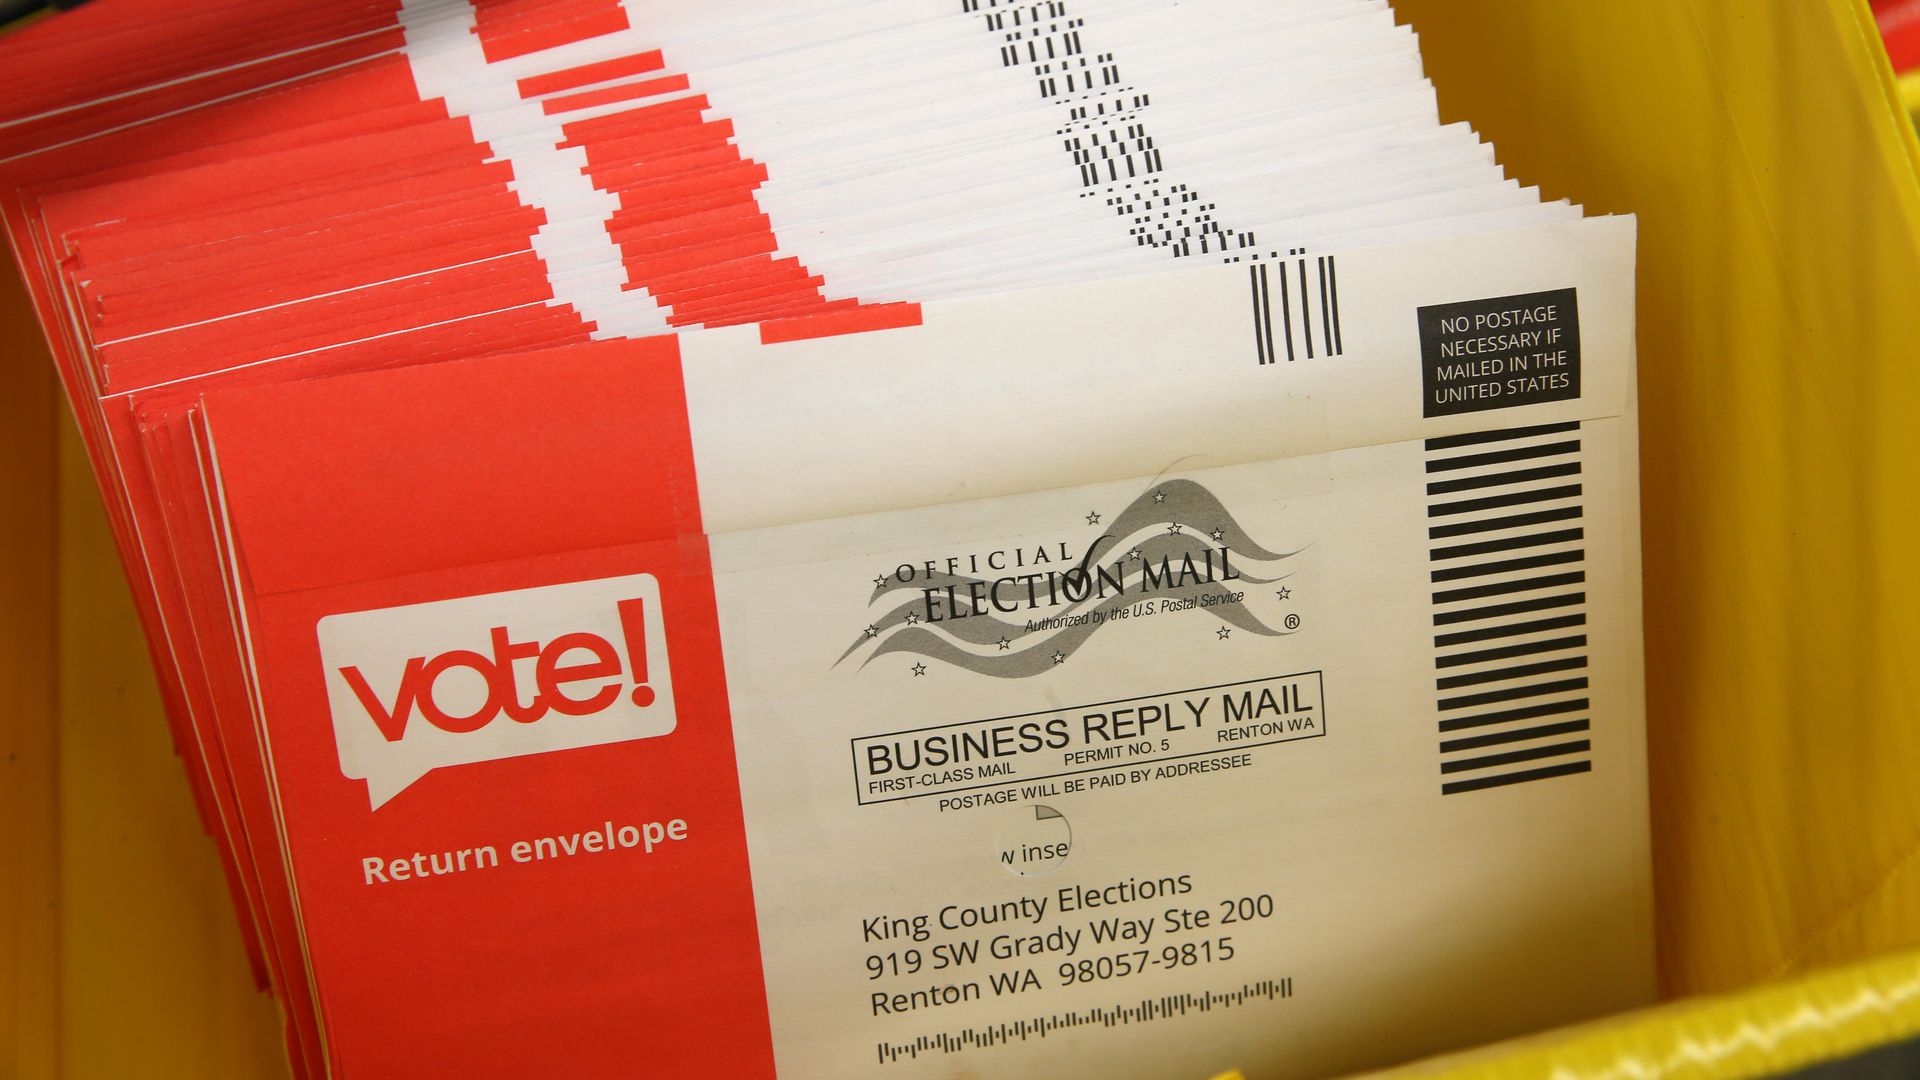 A pile of ballots in red and white envelopes waiting to be sorted, with the word "vote" written on one side.